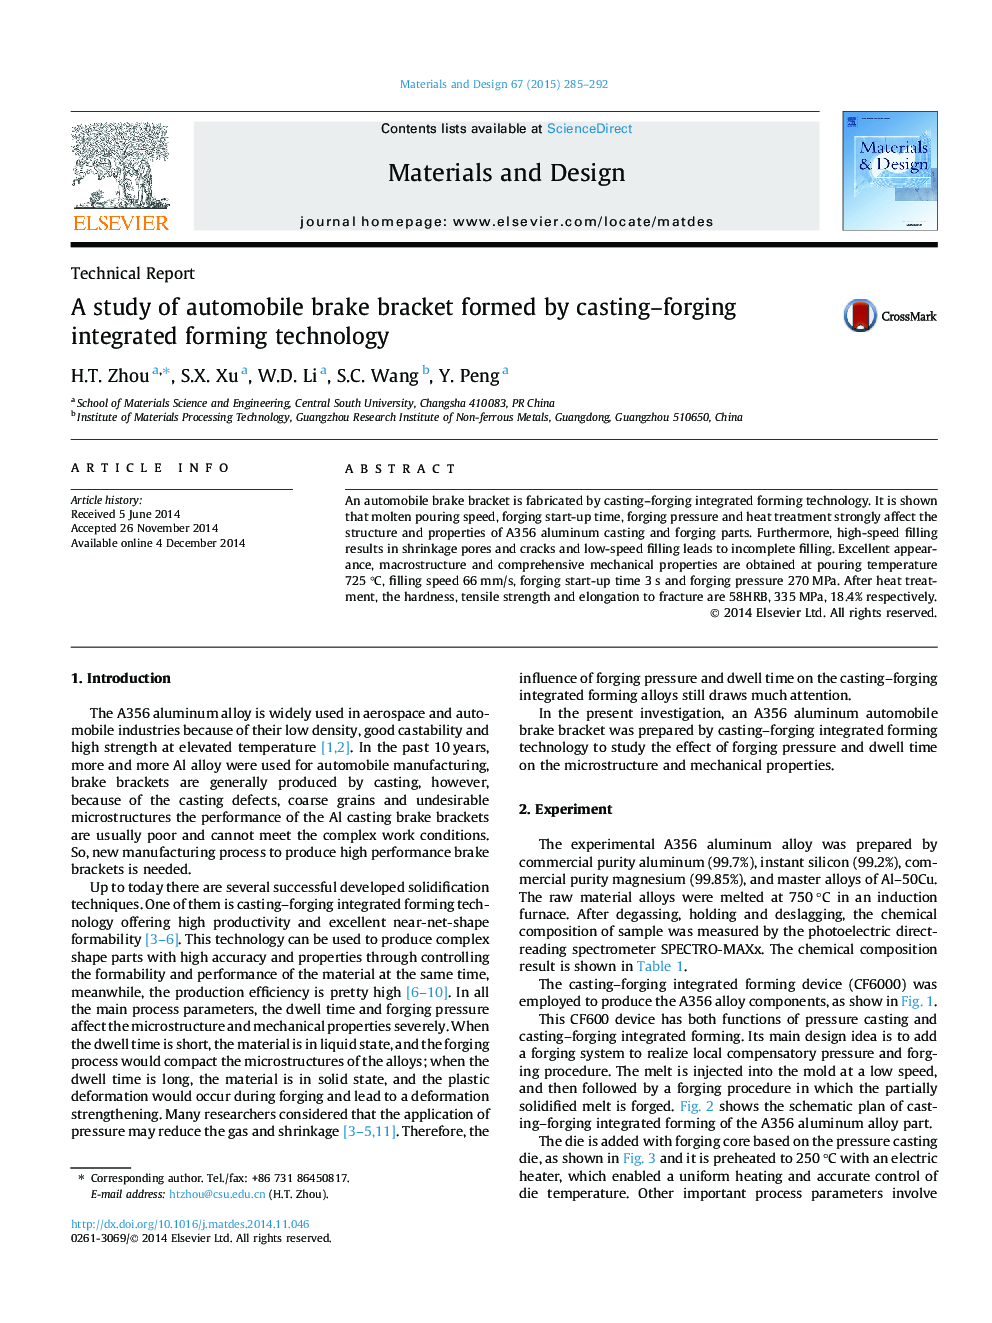 A study of automobile brake bracket formed by casting-forging integrated forming technology